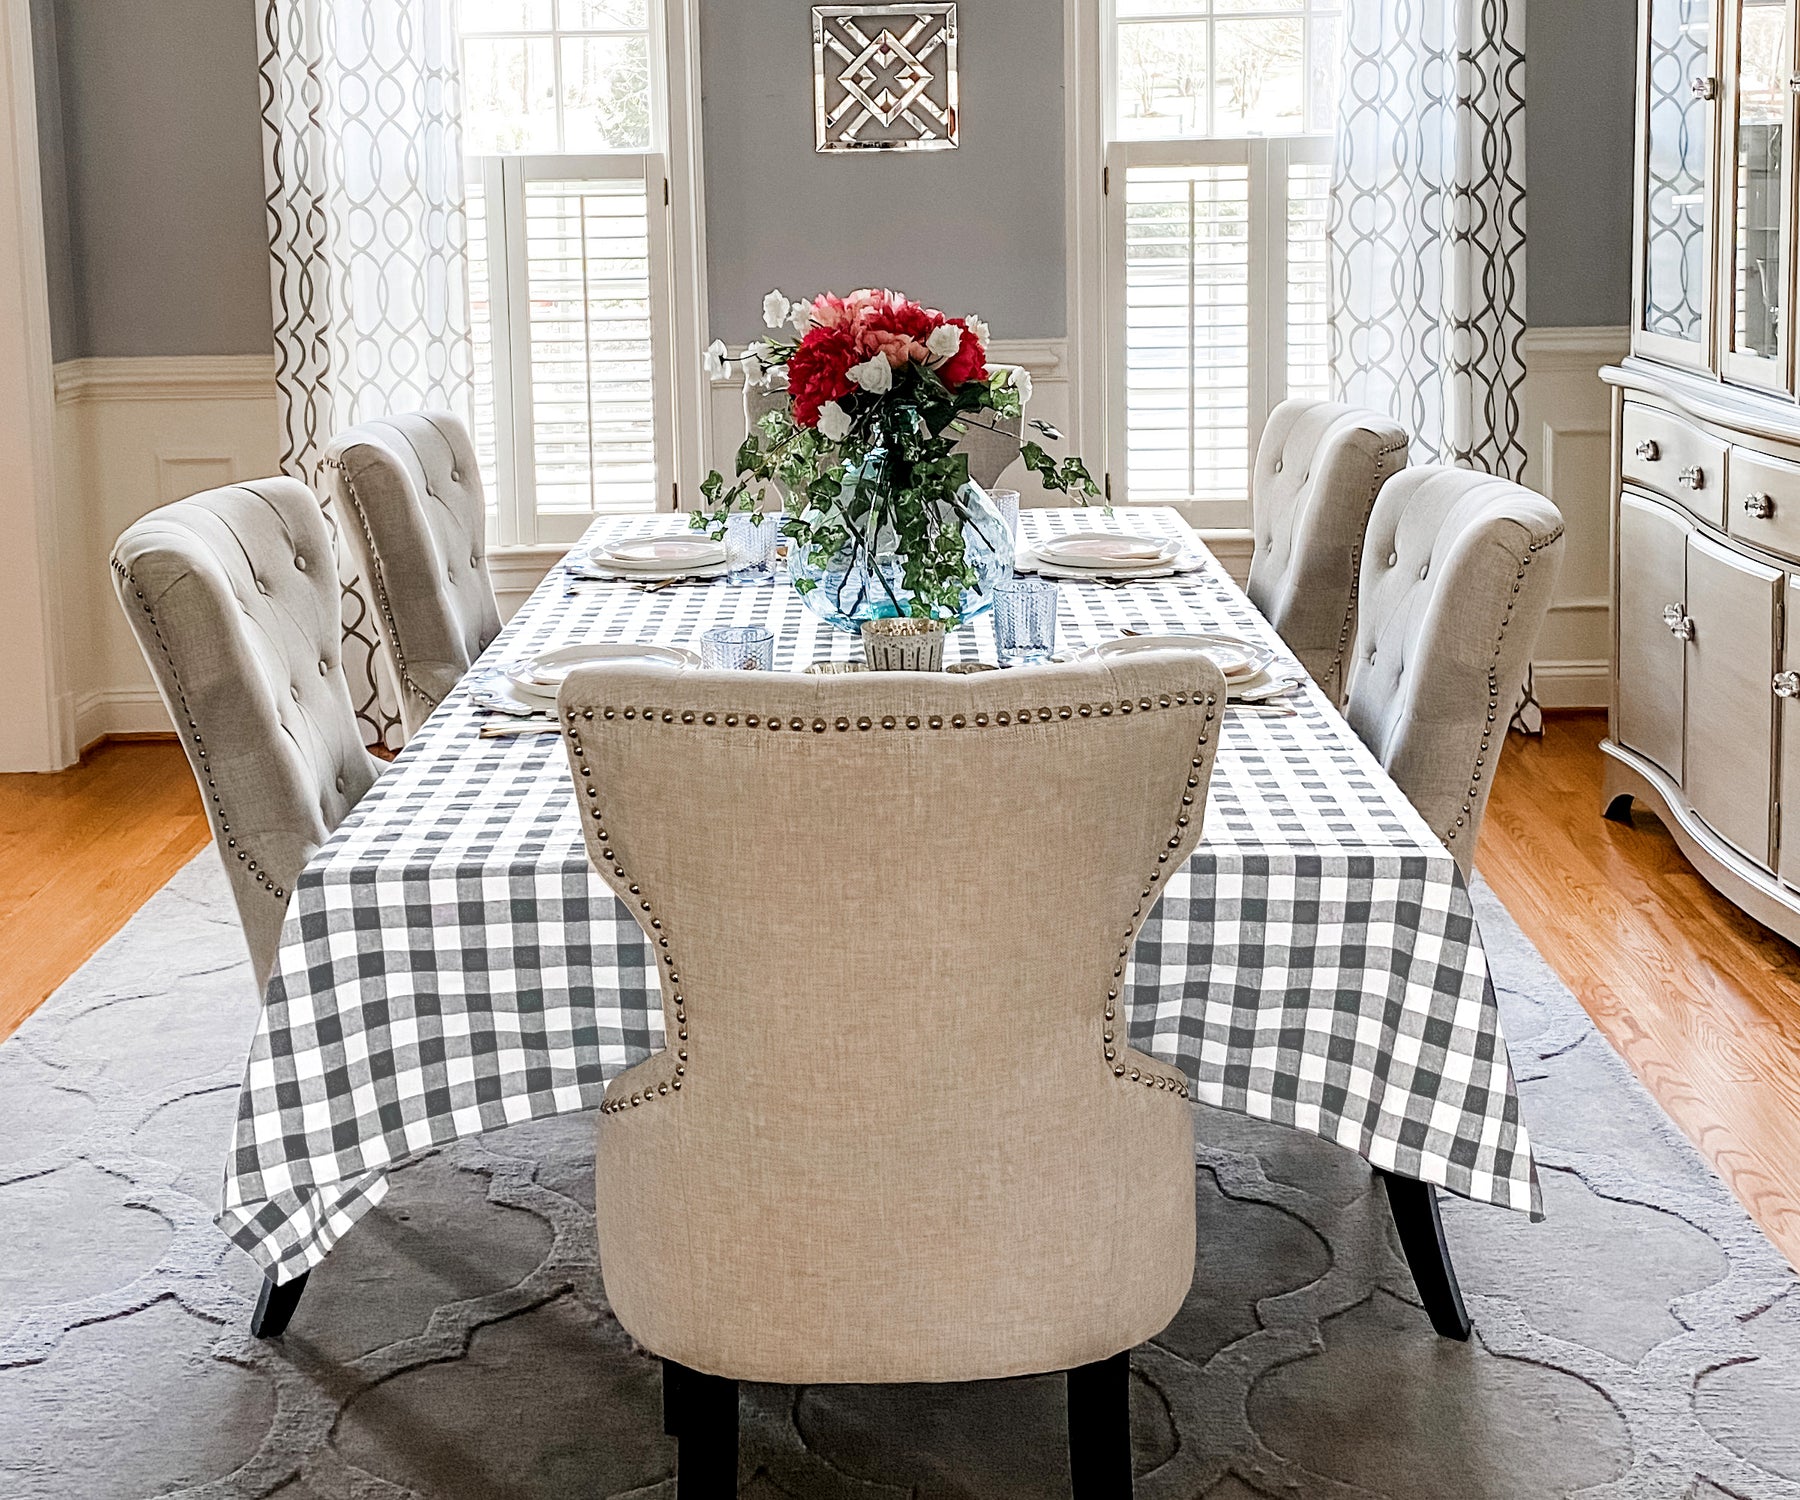 Timeless Gingham Tablecloth in various colors for versatile use.